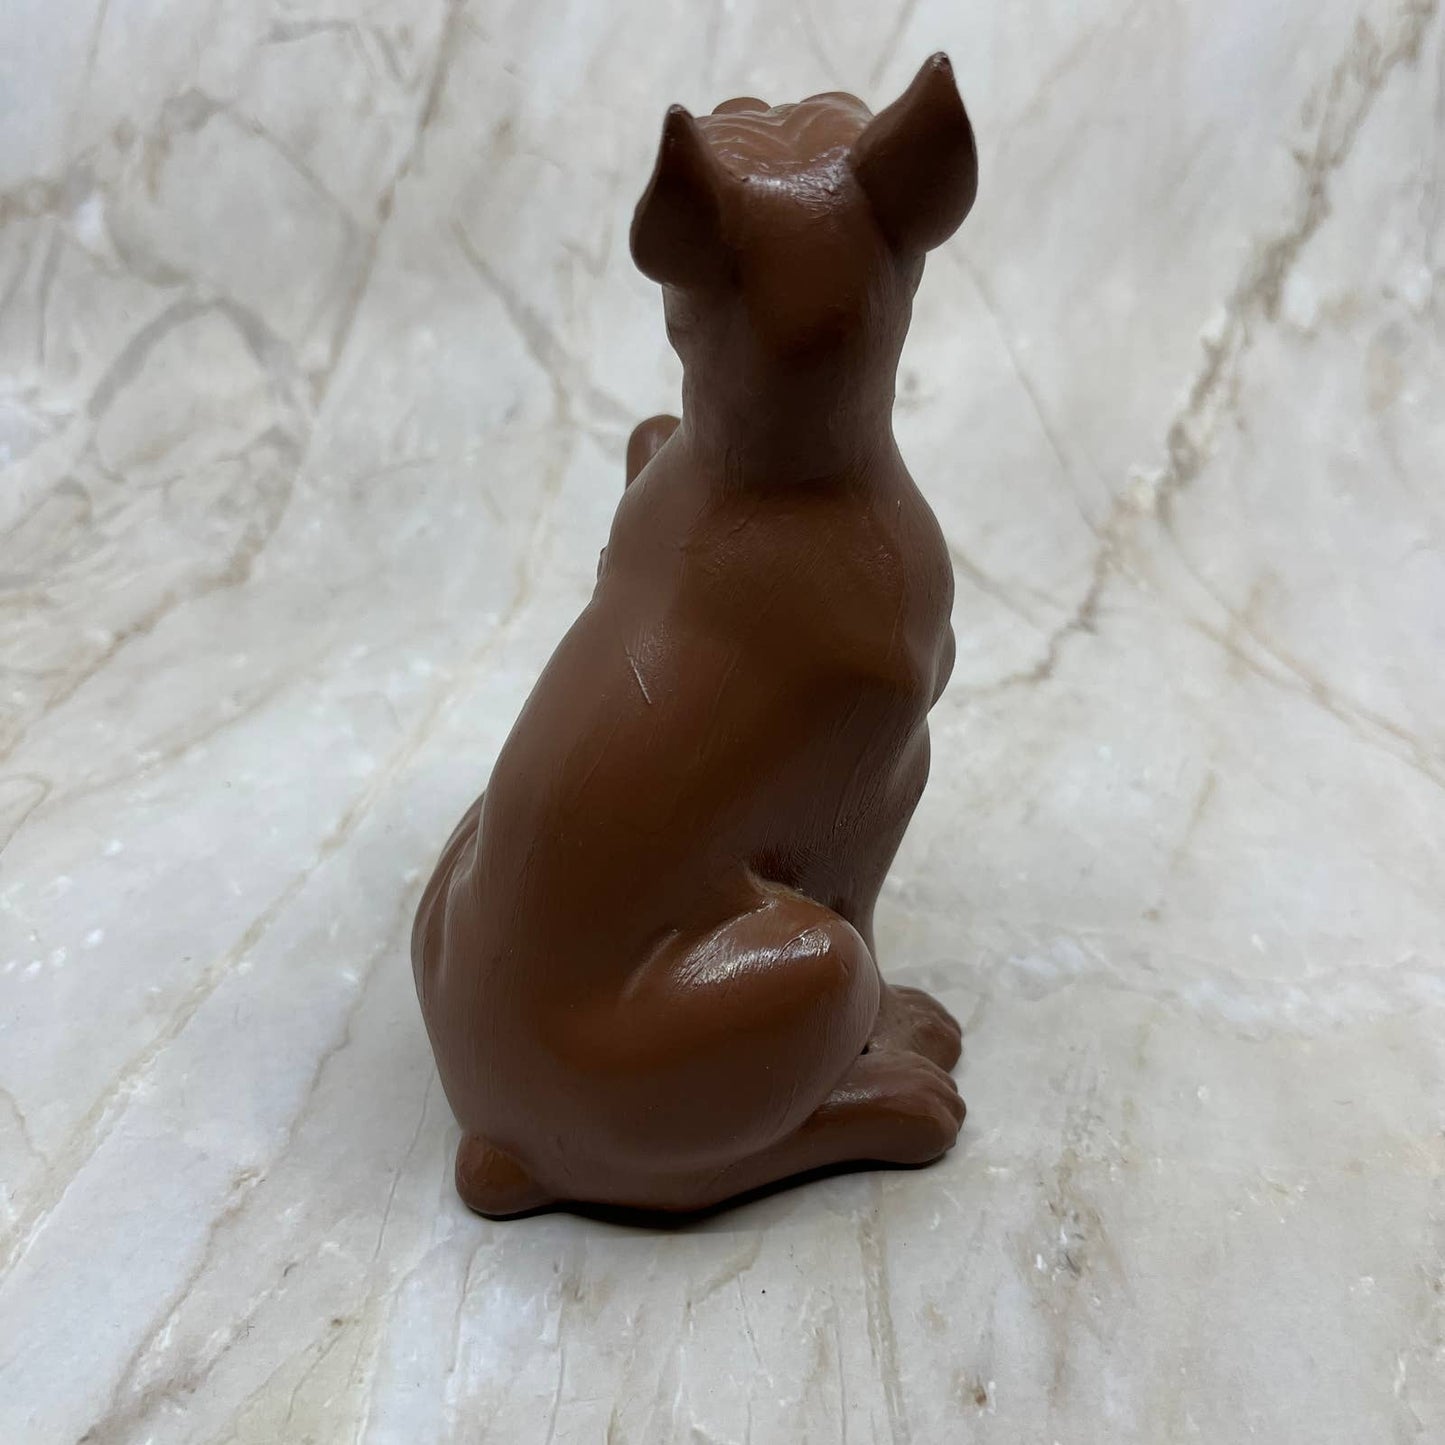 MCM Ceramic Dog Boxer Figurine Atlantic Mold Co 6” Paw Up Hand Painted Brown TI7